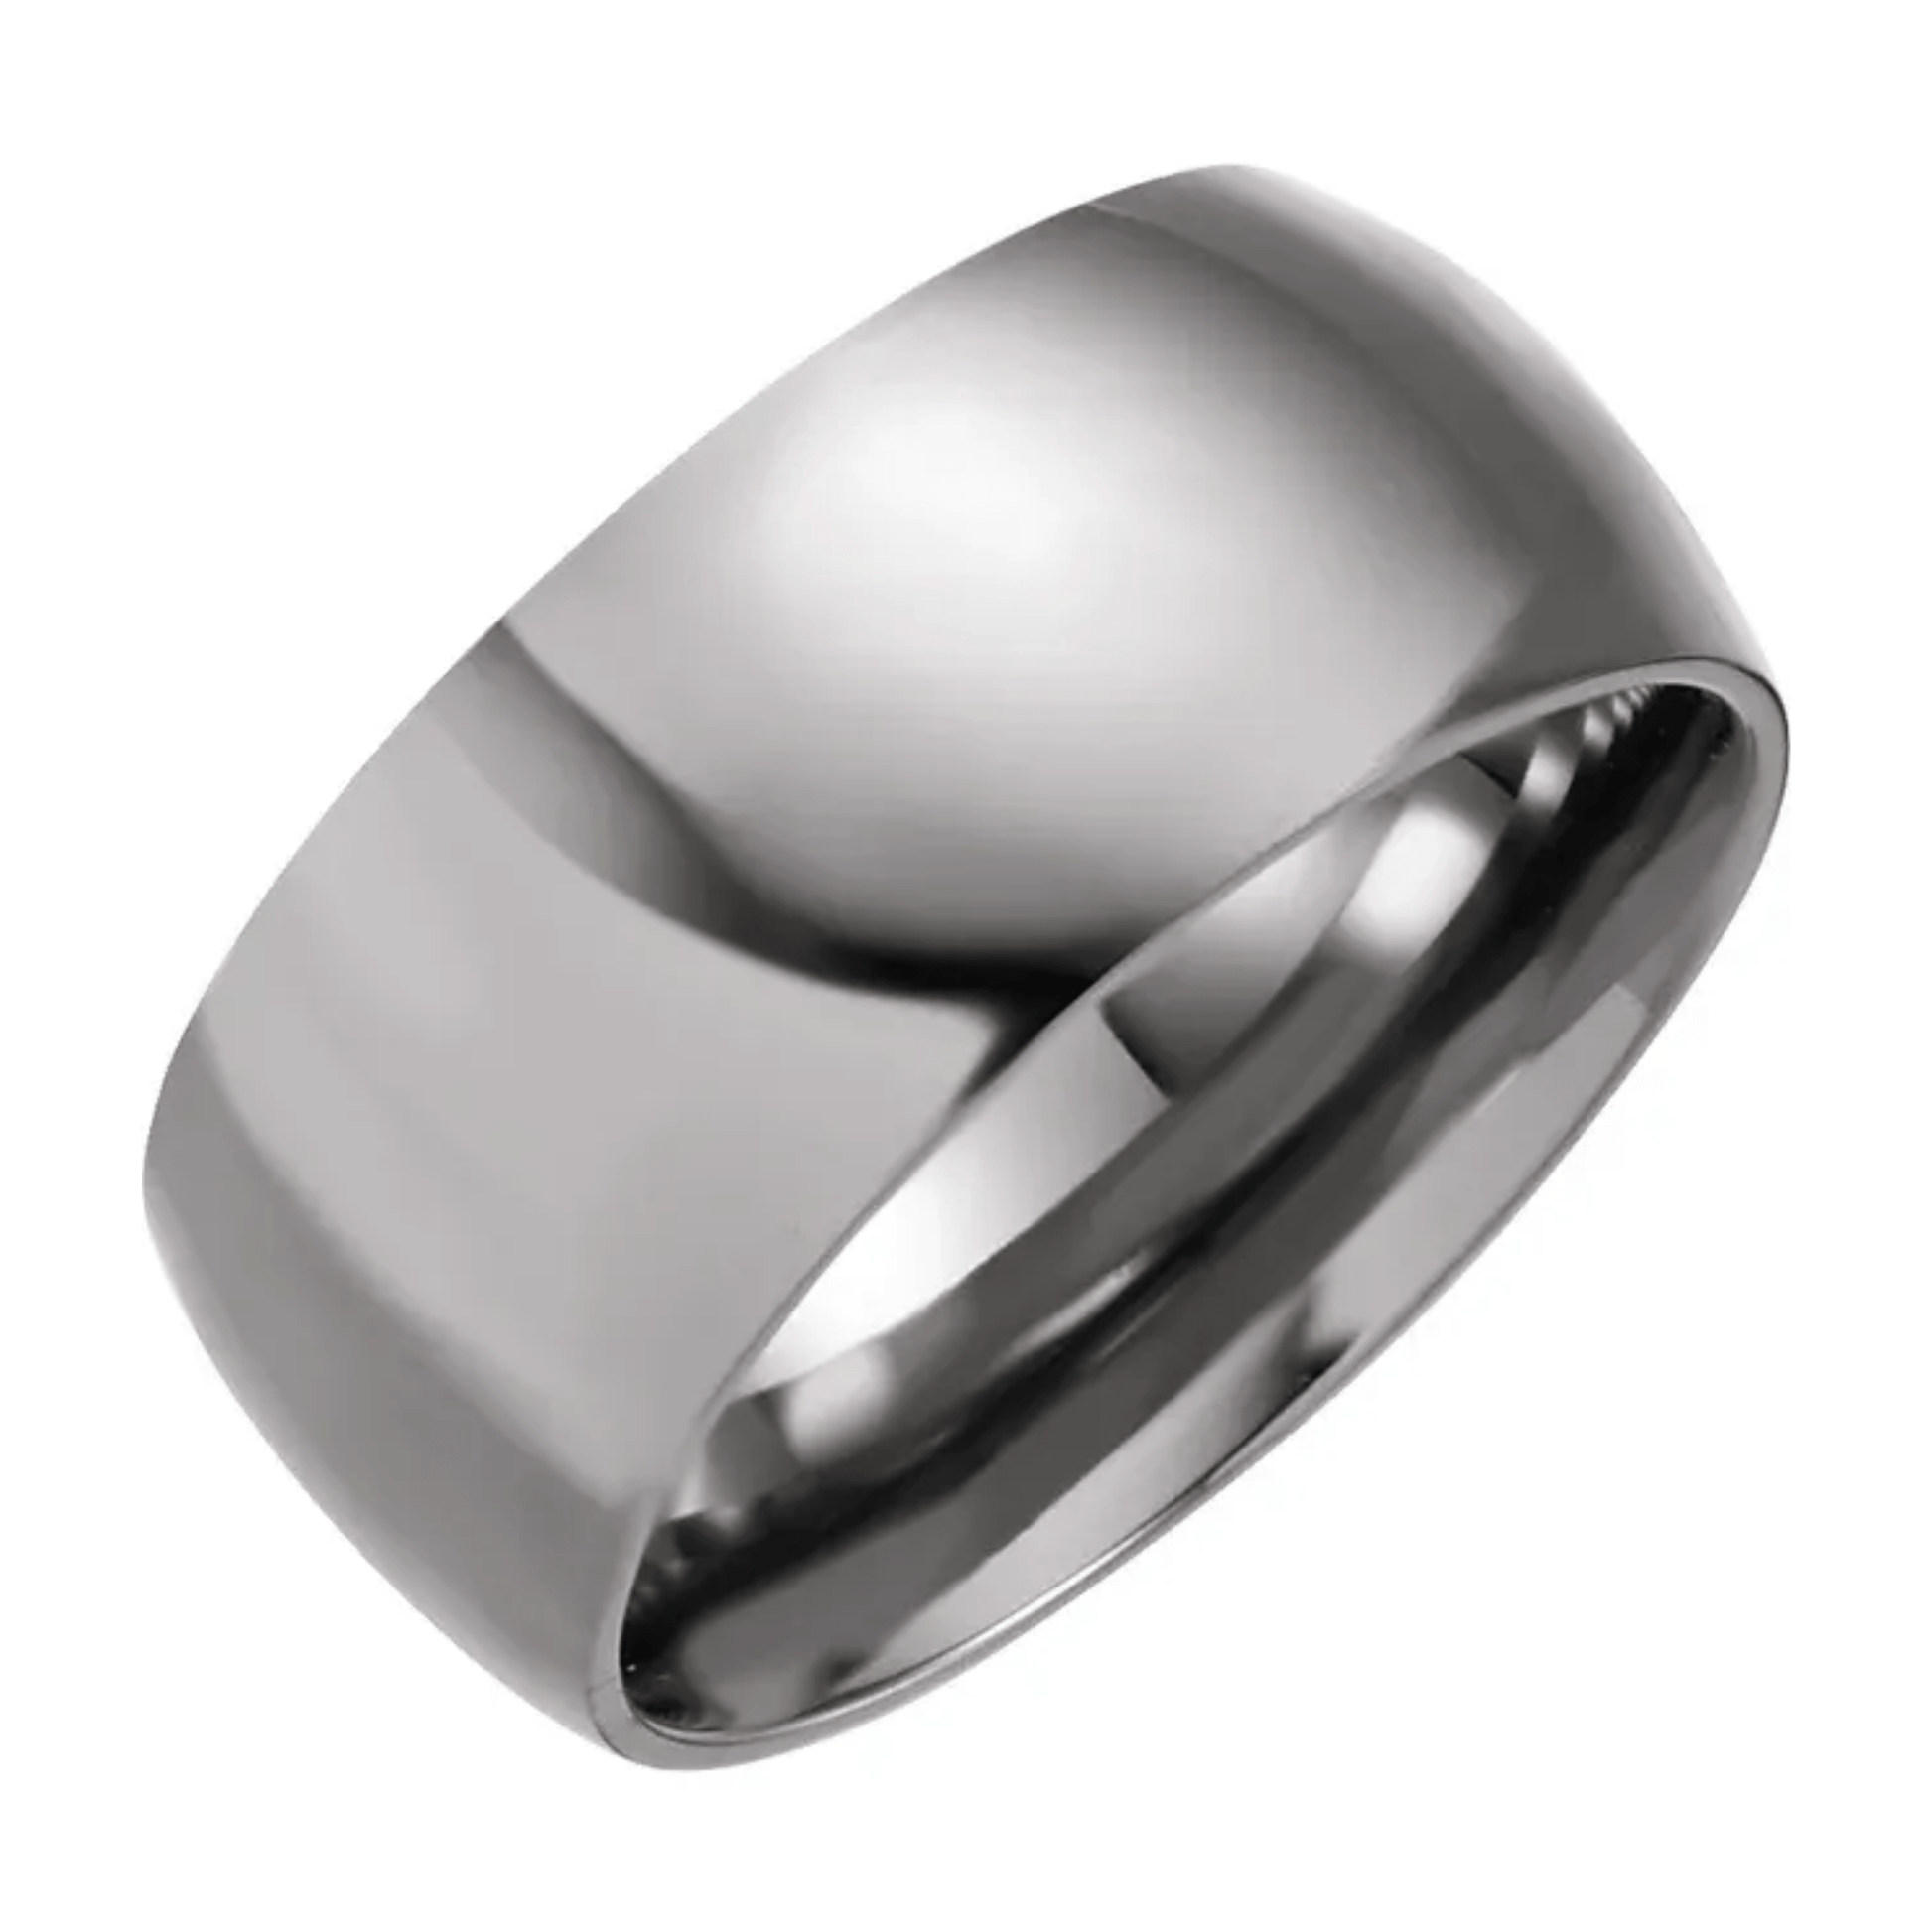 Titanium Domed Band - Moments Jewellery